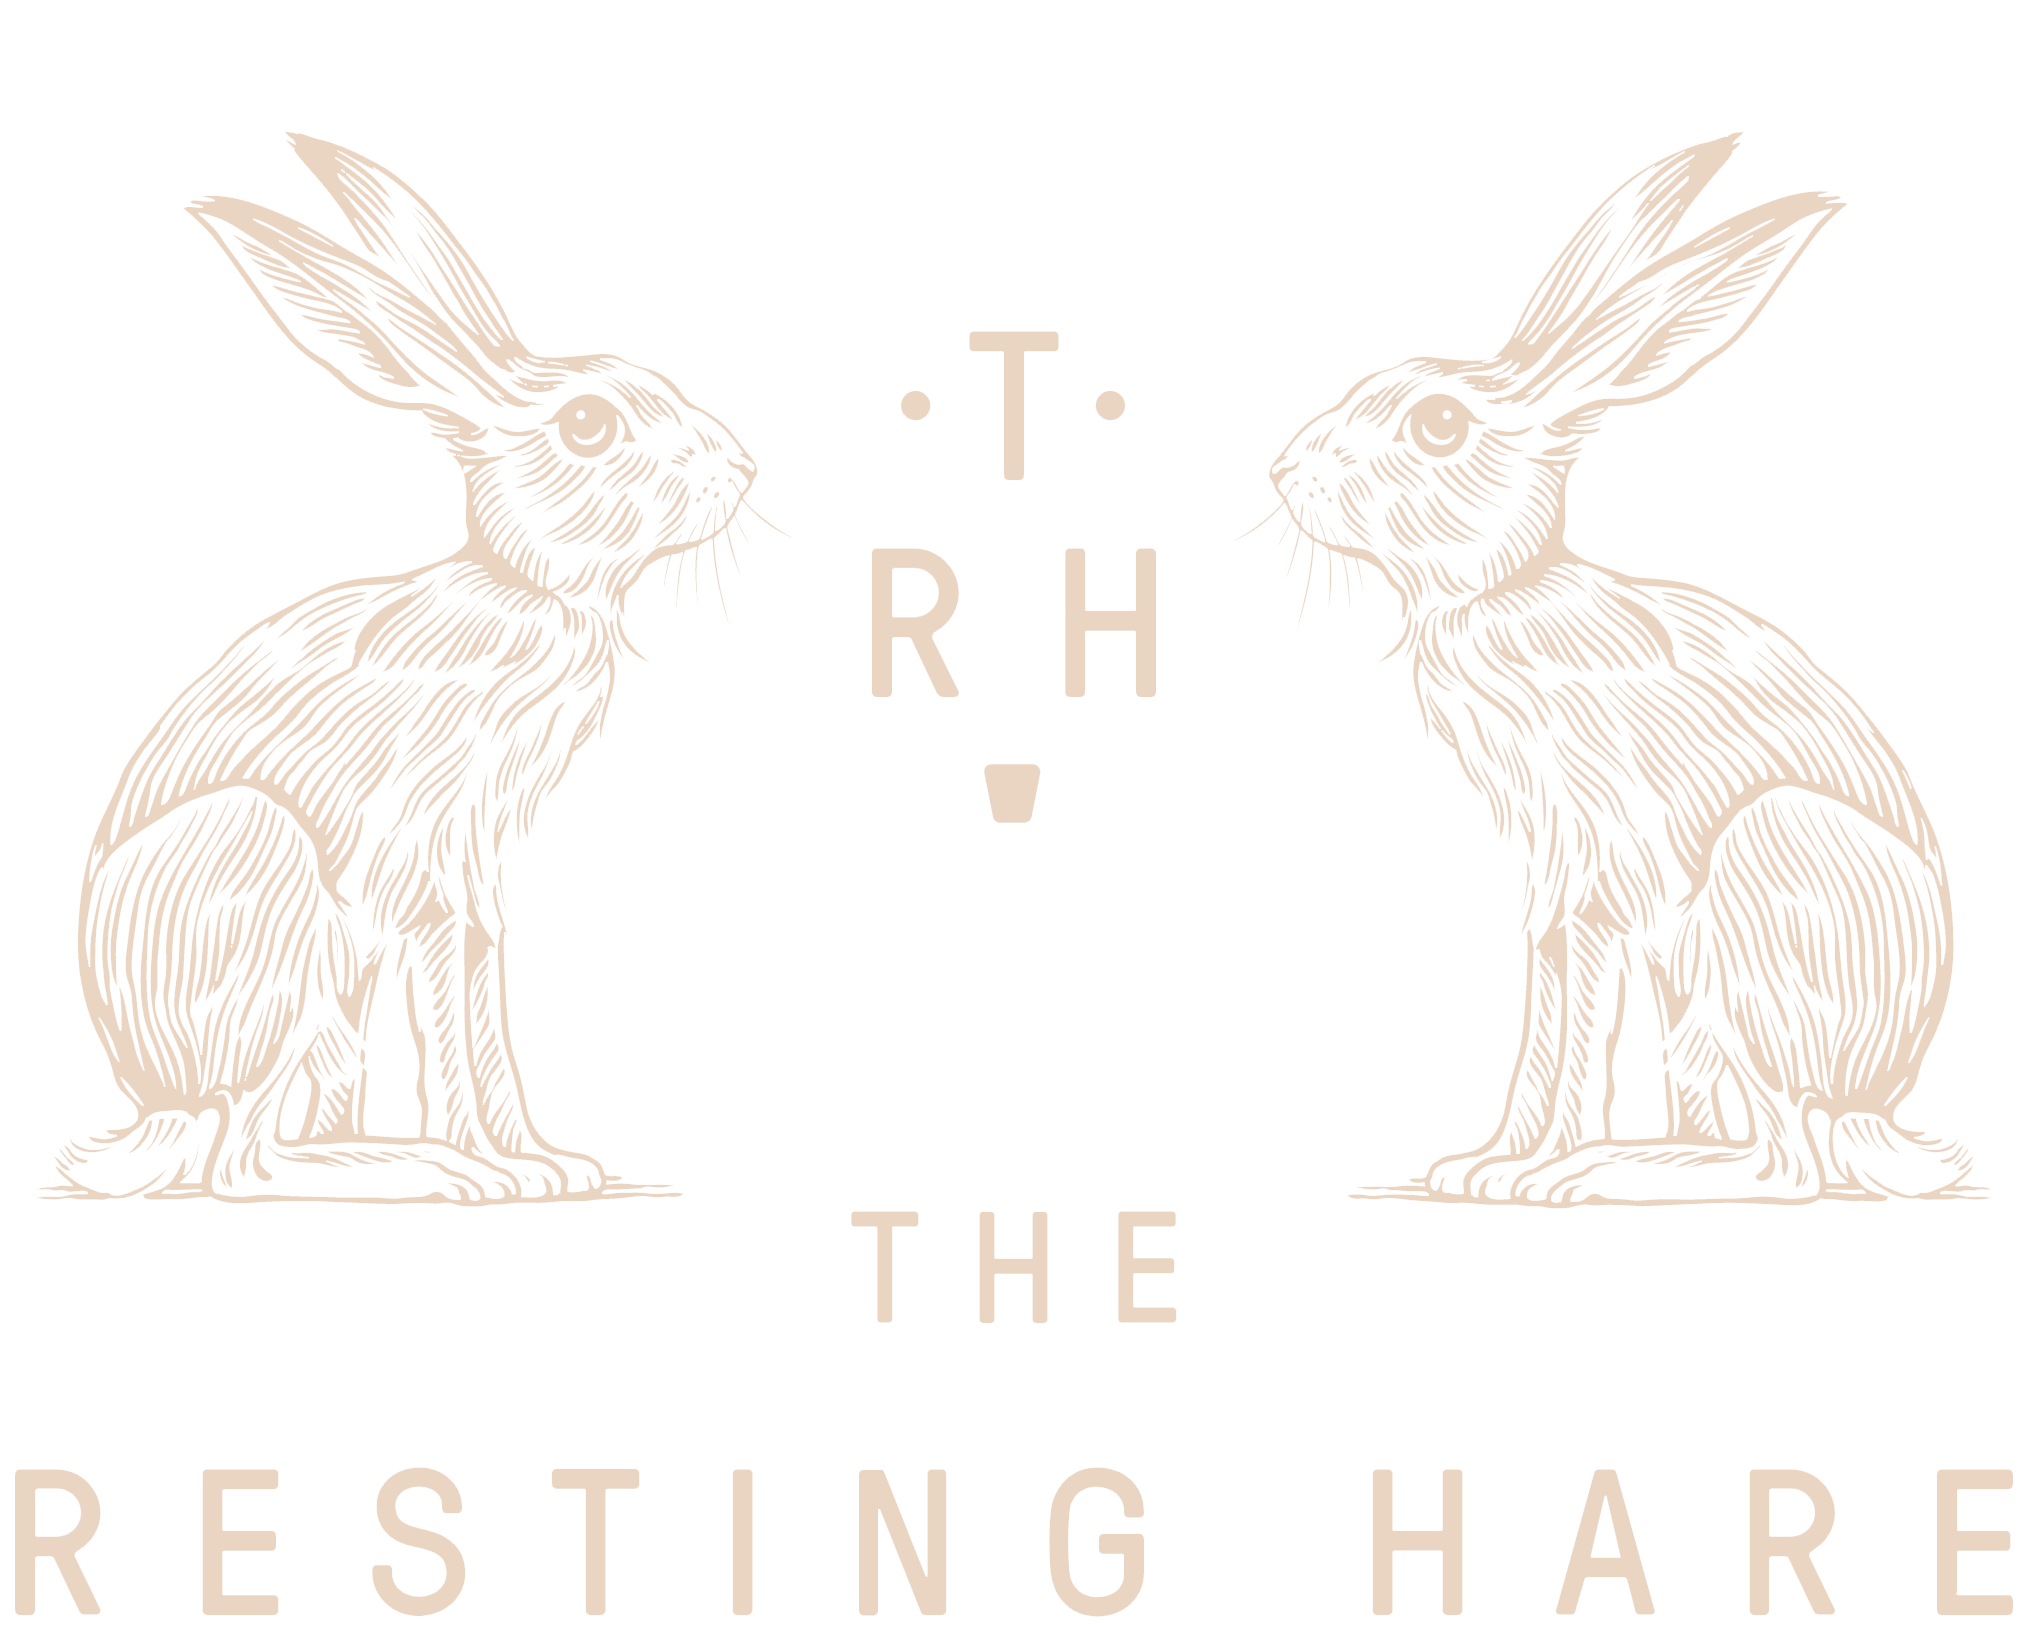 The Resting Hare